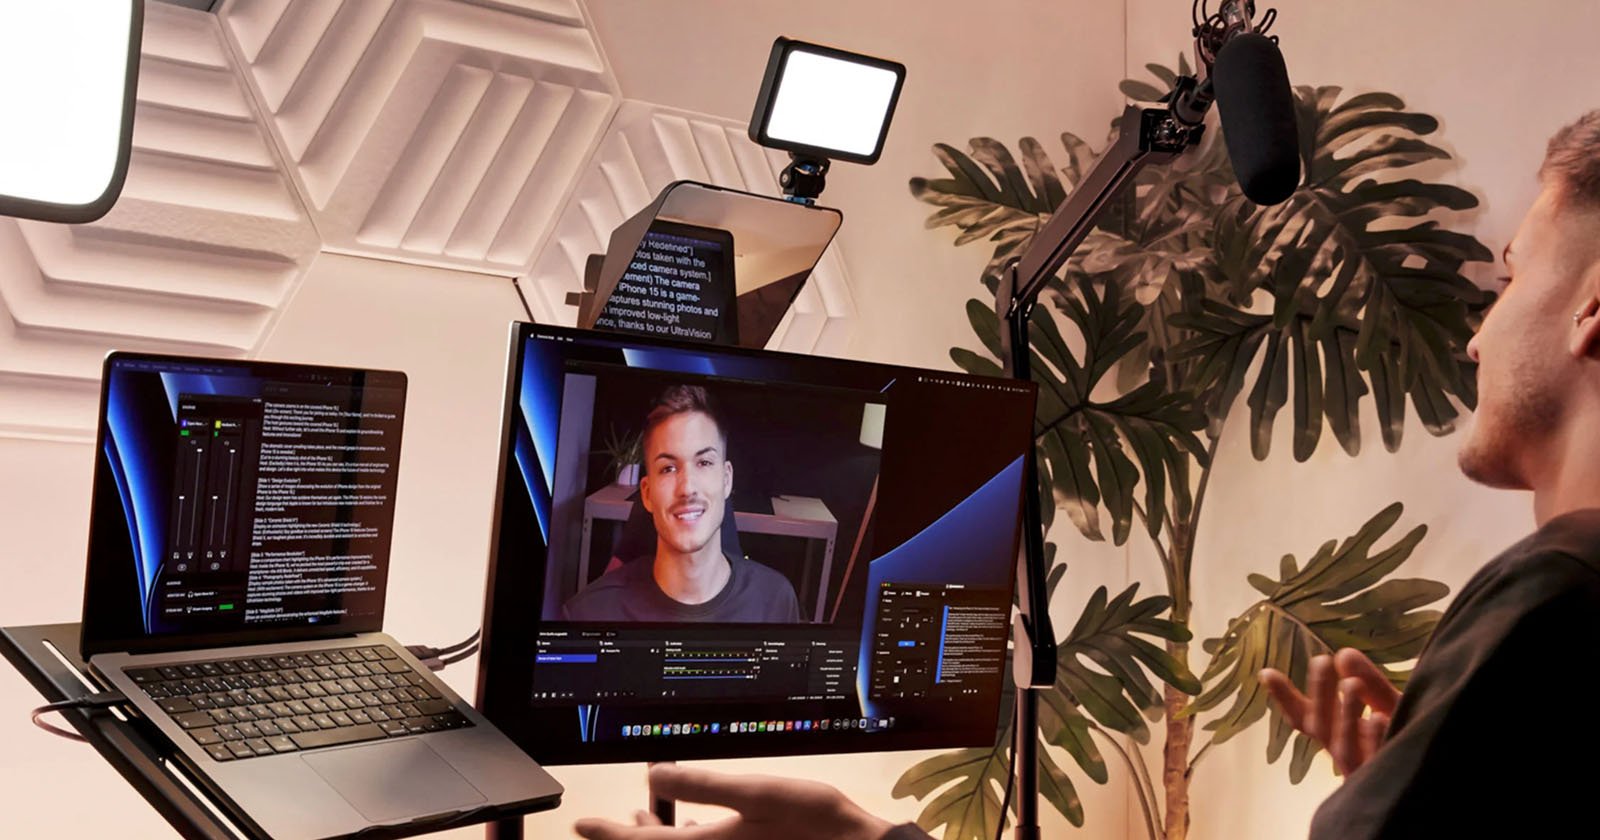 Elgato announces a professional $199 light rig for streamers, creators -  The Verge